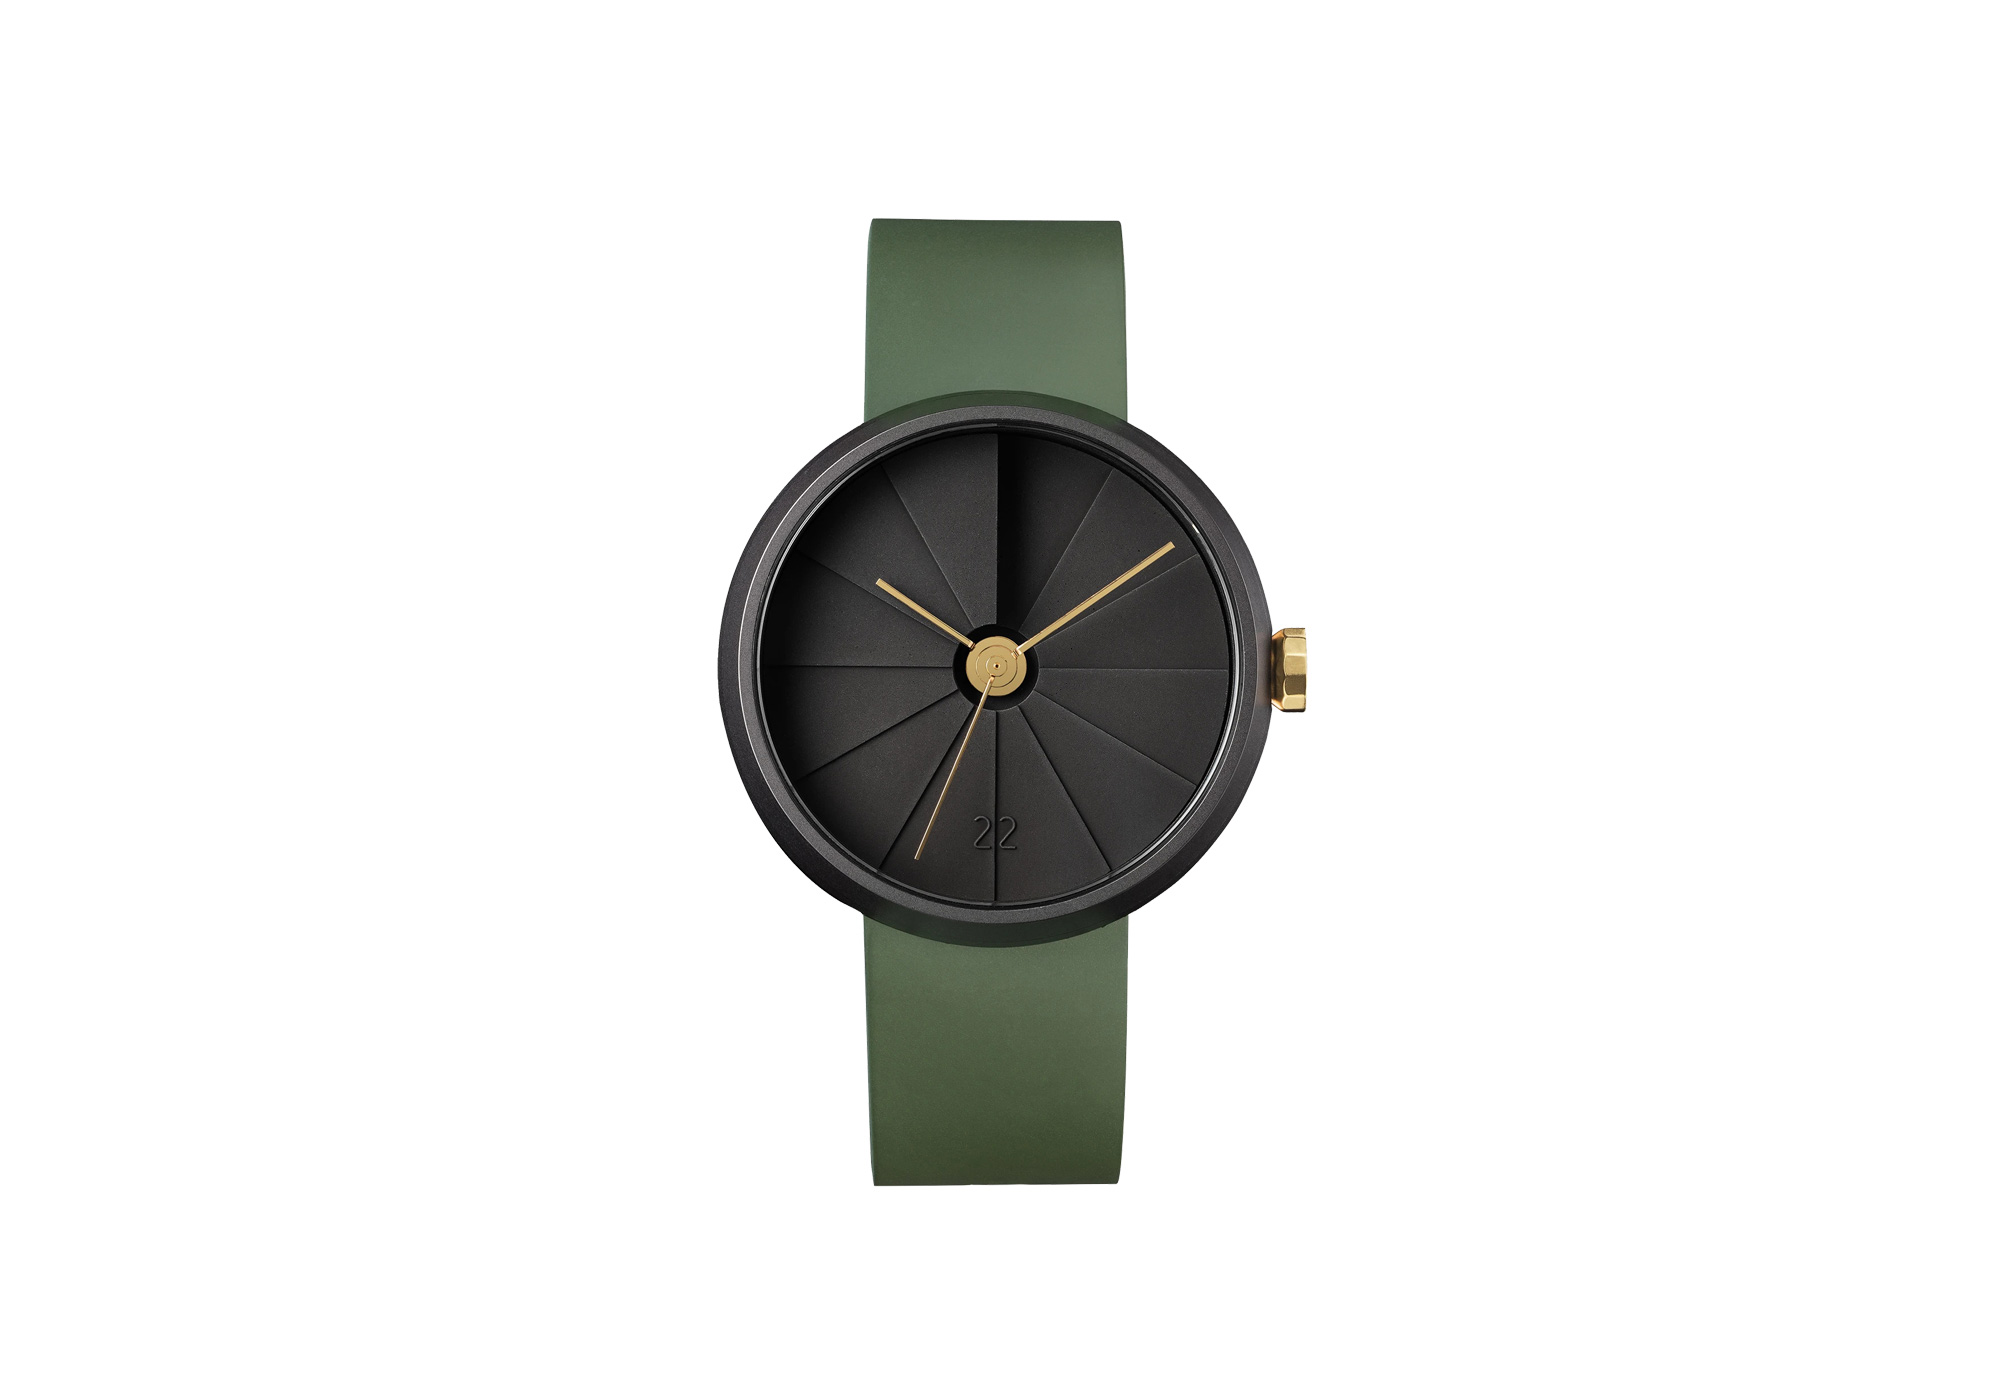 4th Dimension concrete watch, green leather band